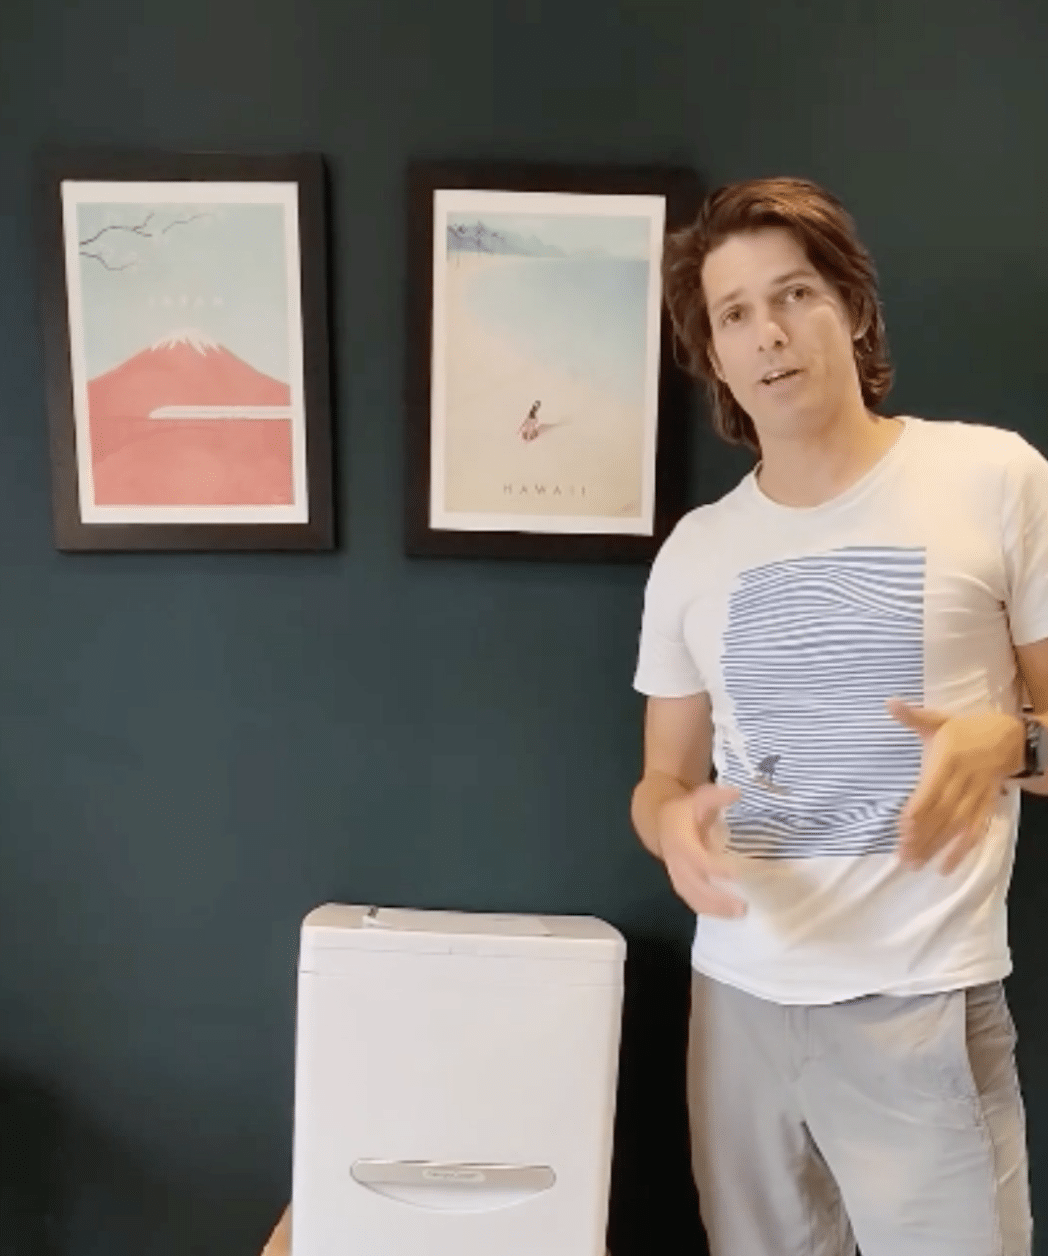 Unboxing Cuddy the composting toilet: What's in the box?